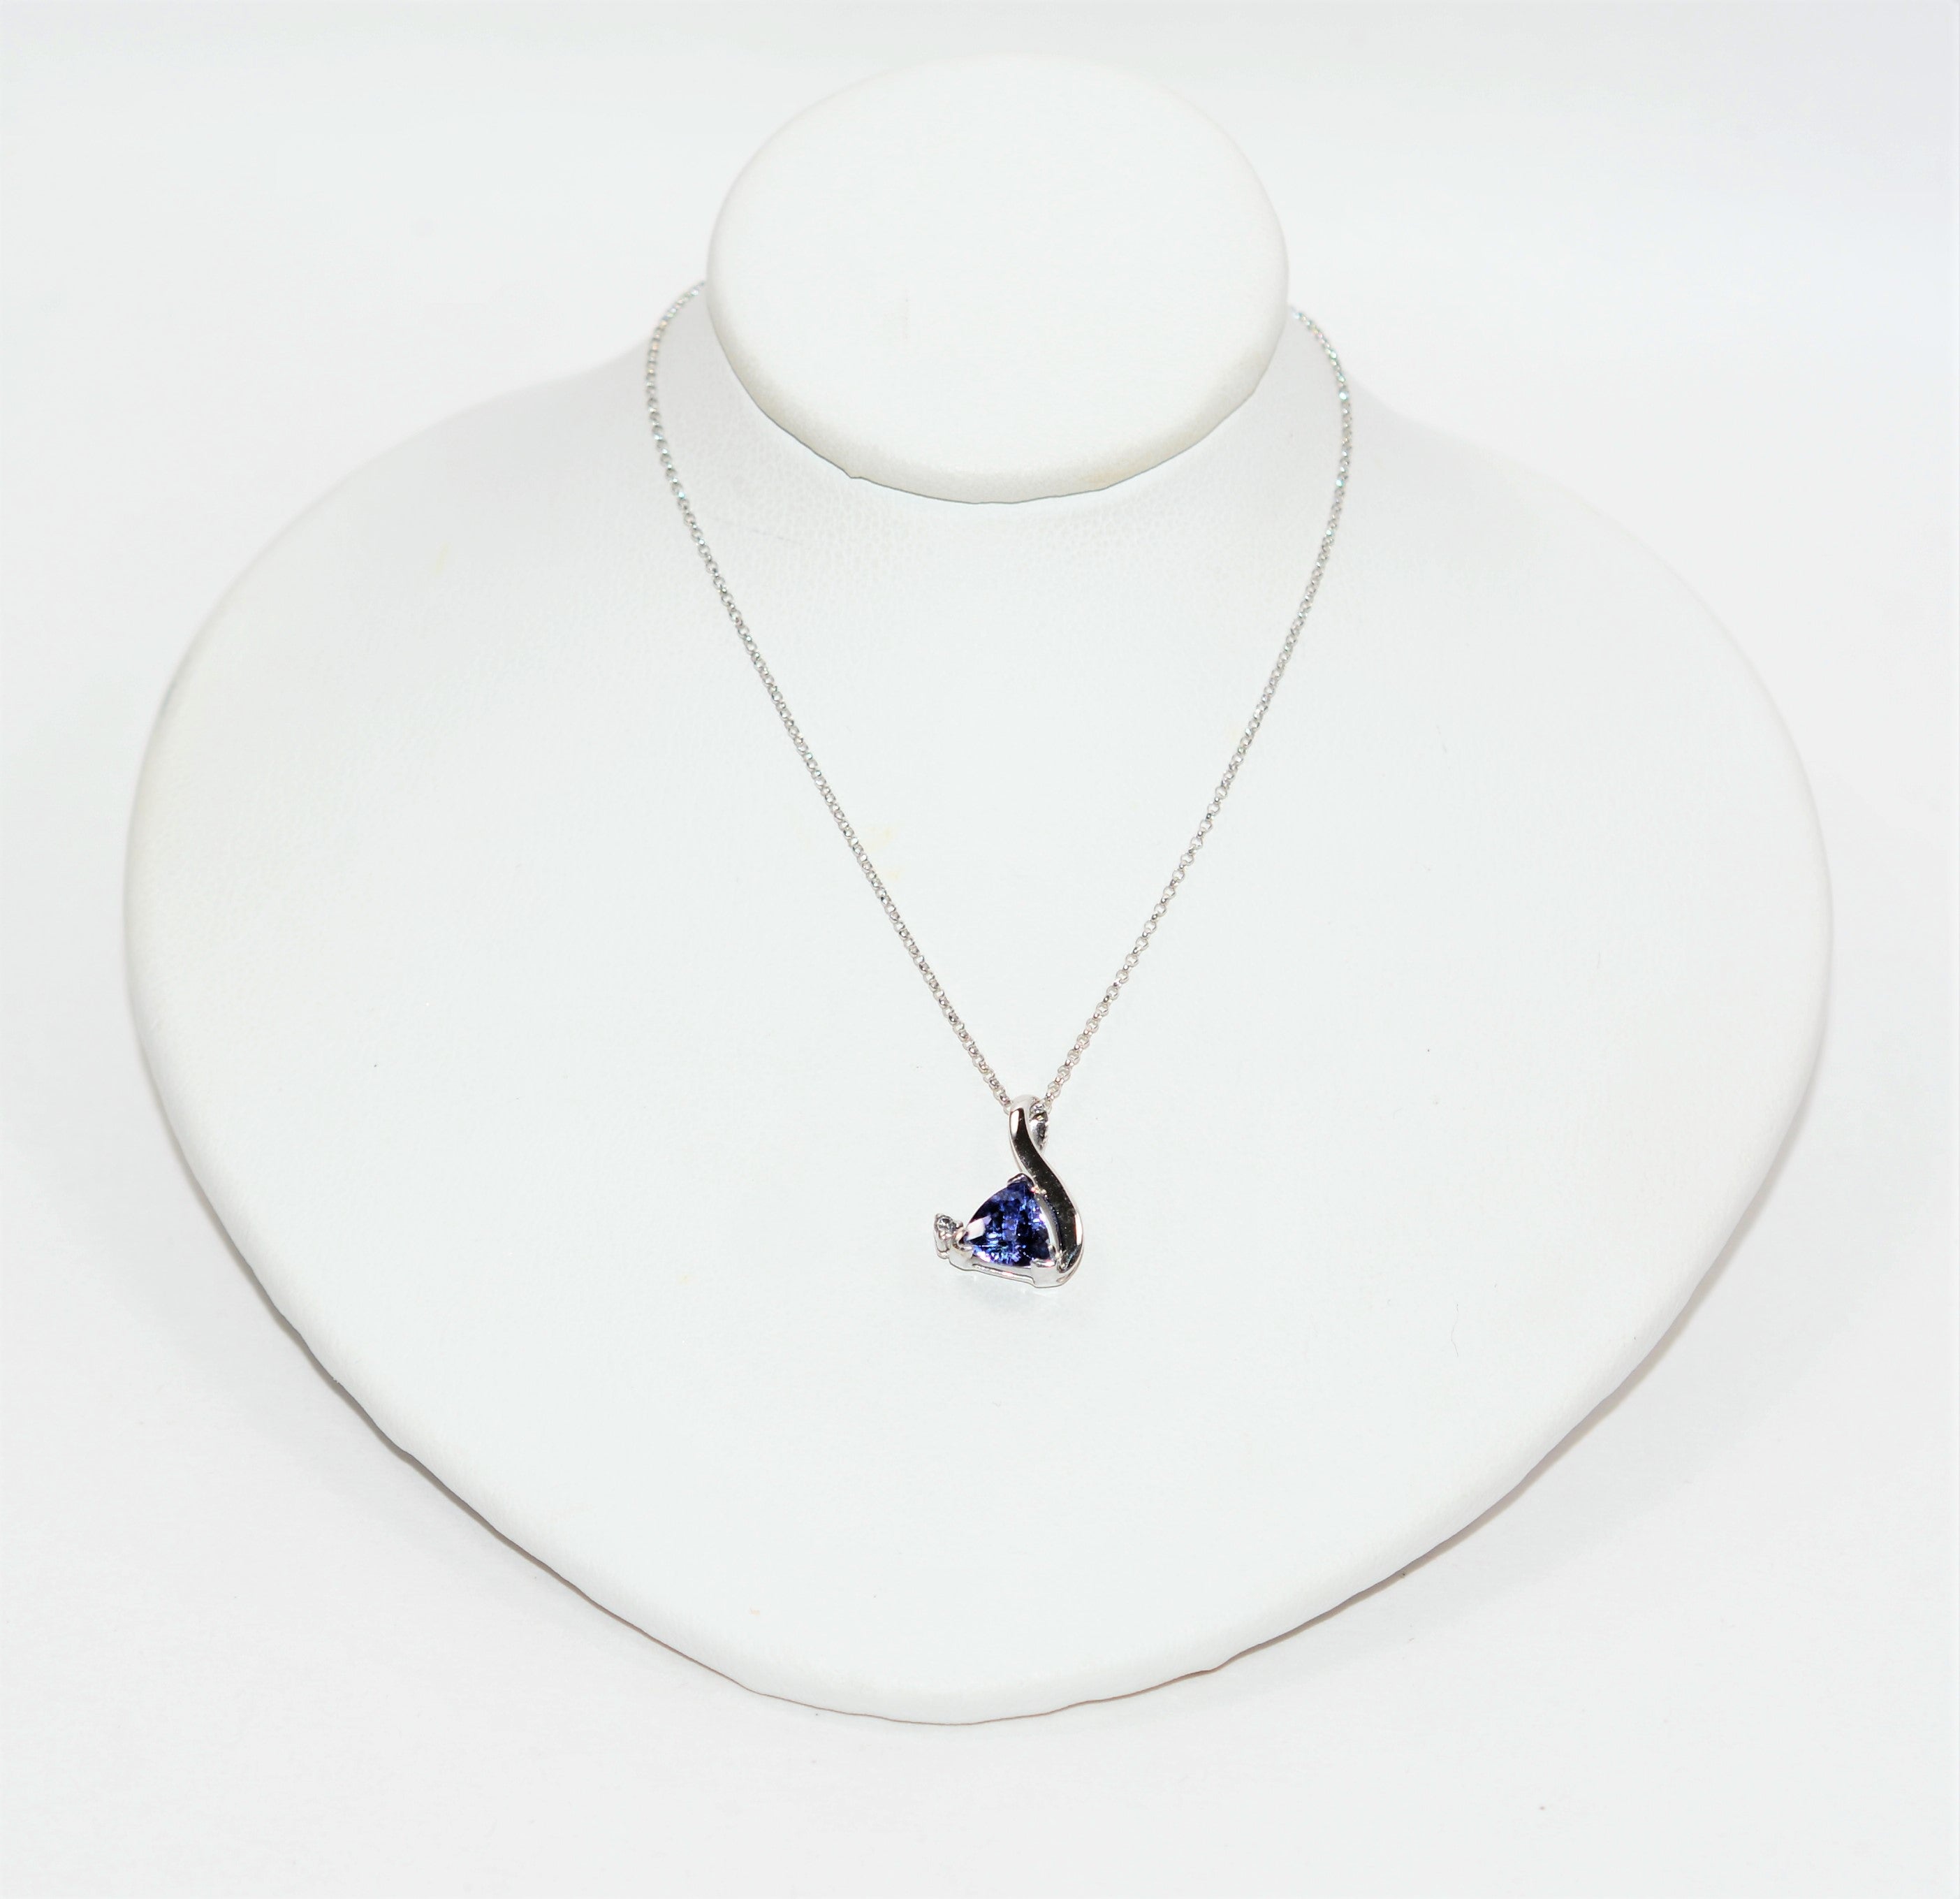 Natural Tanzanite & Diamond Necklace 14K Solid White Gold 1.00tcw Gemstone Necklace Cocktail Necklace Purple Necklace Birthstone Necklace